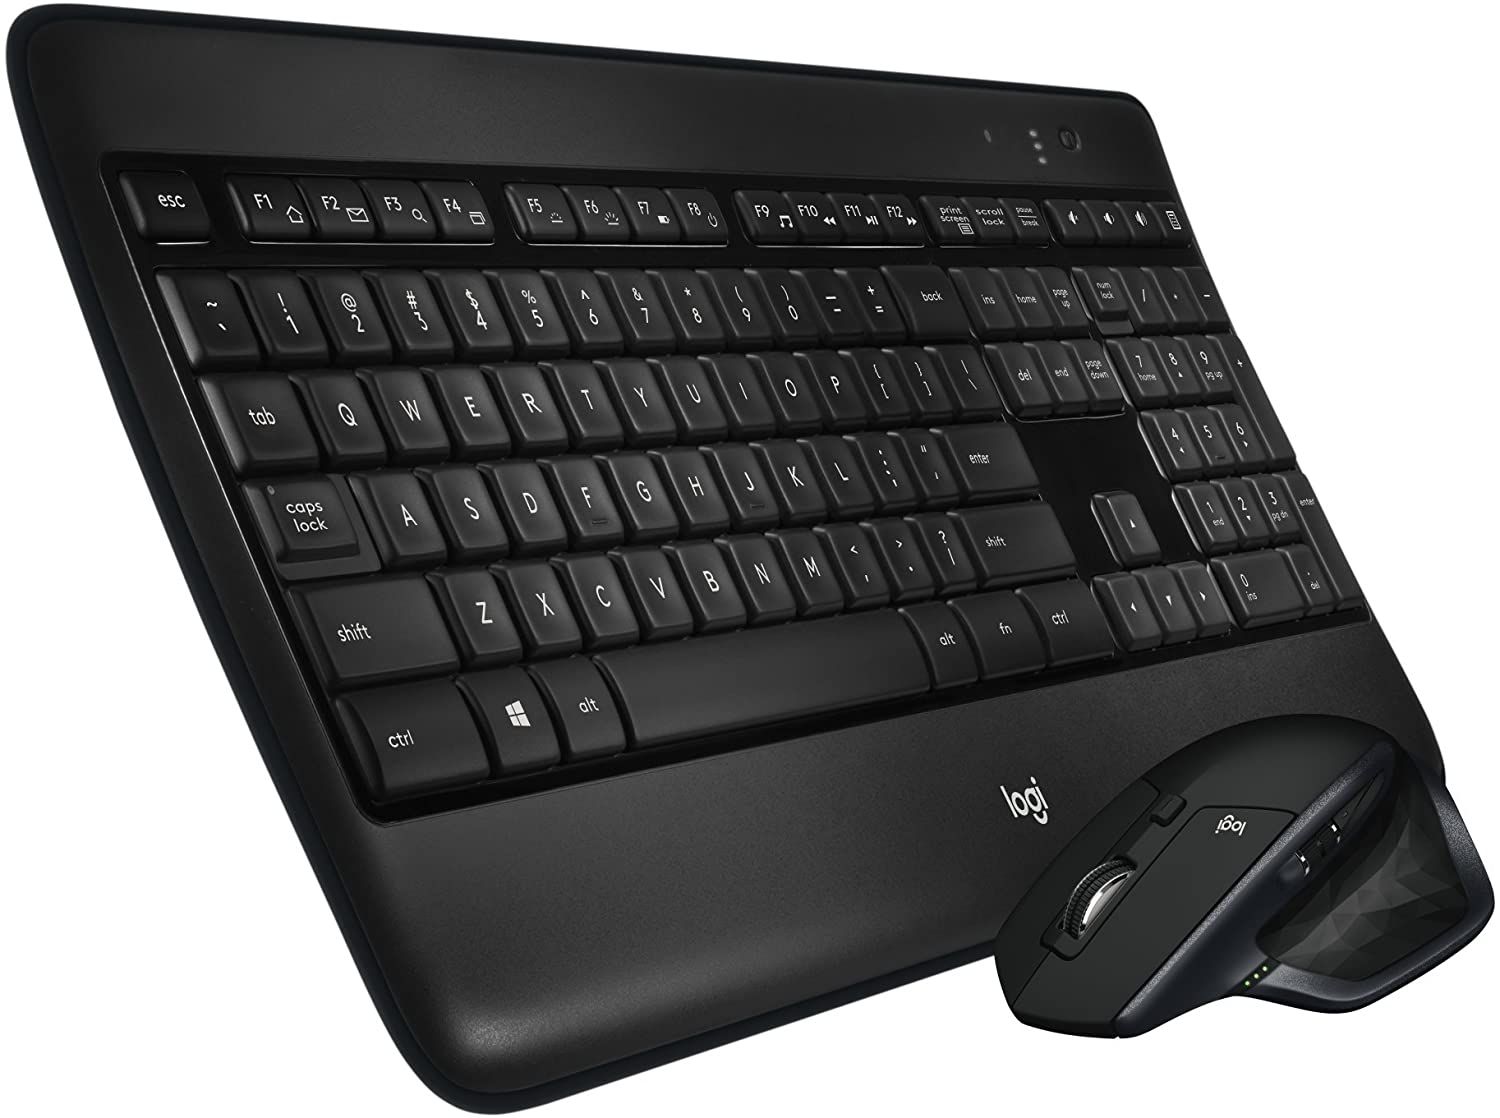 Logitech MX900 Keyboard and Mouse Combo side